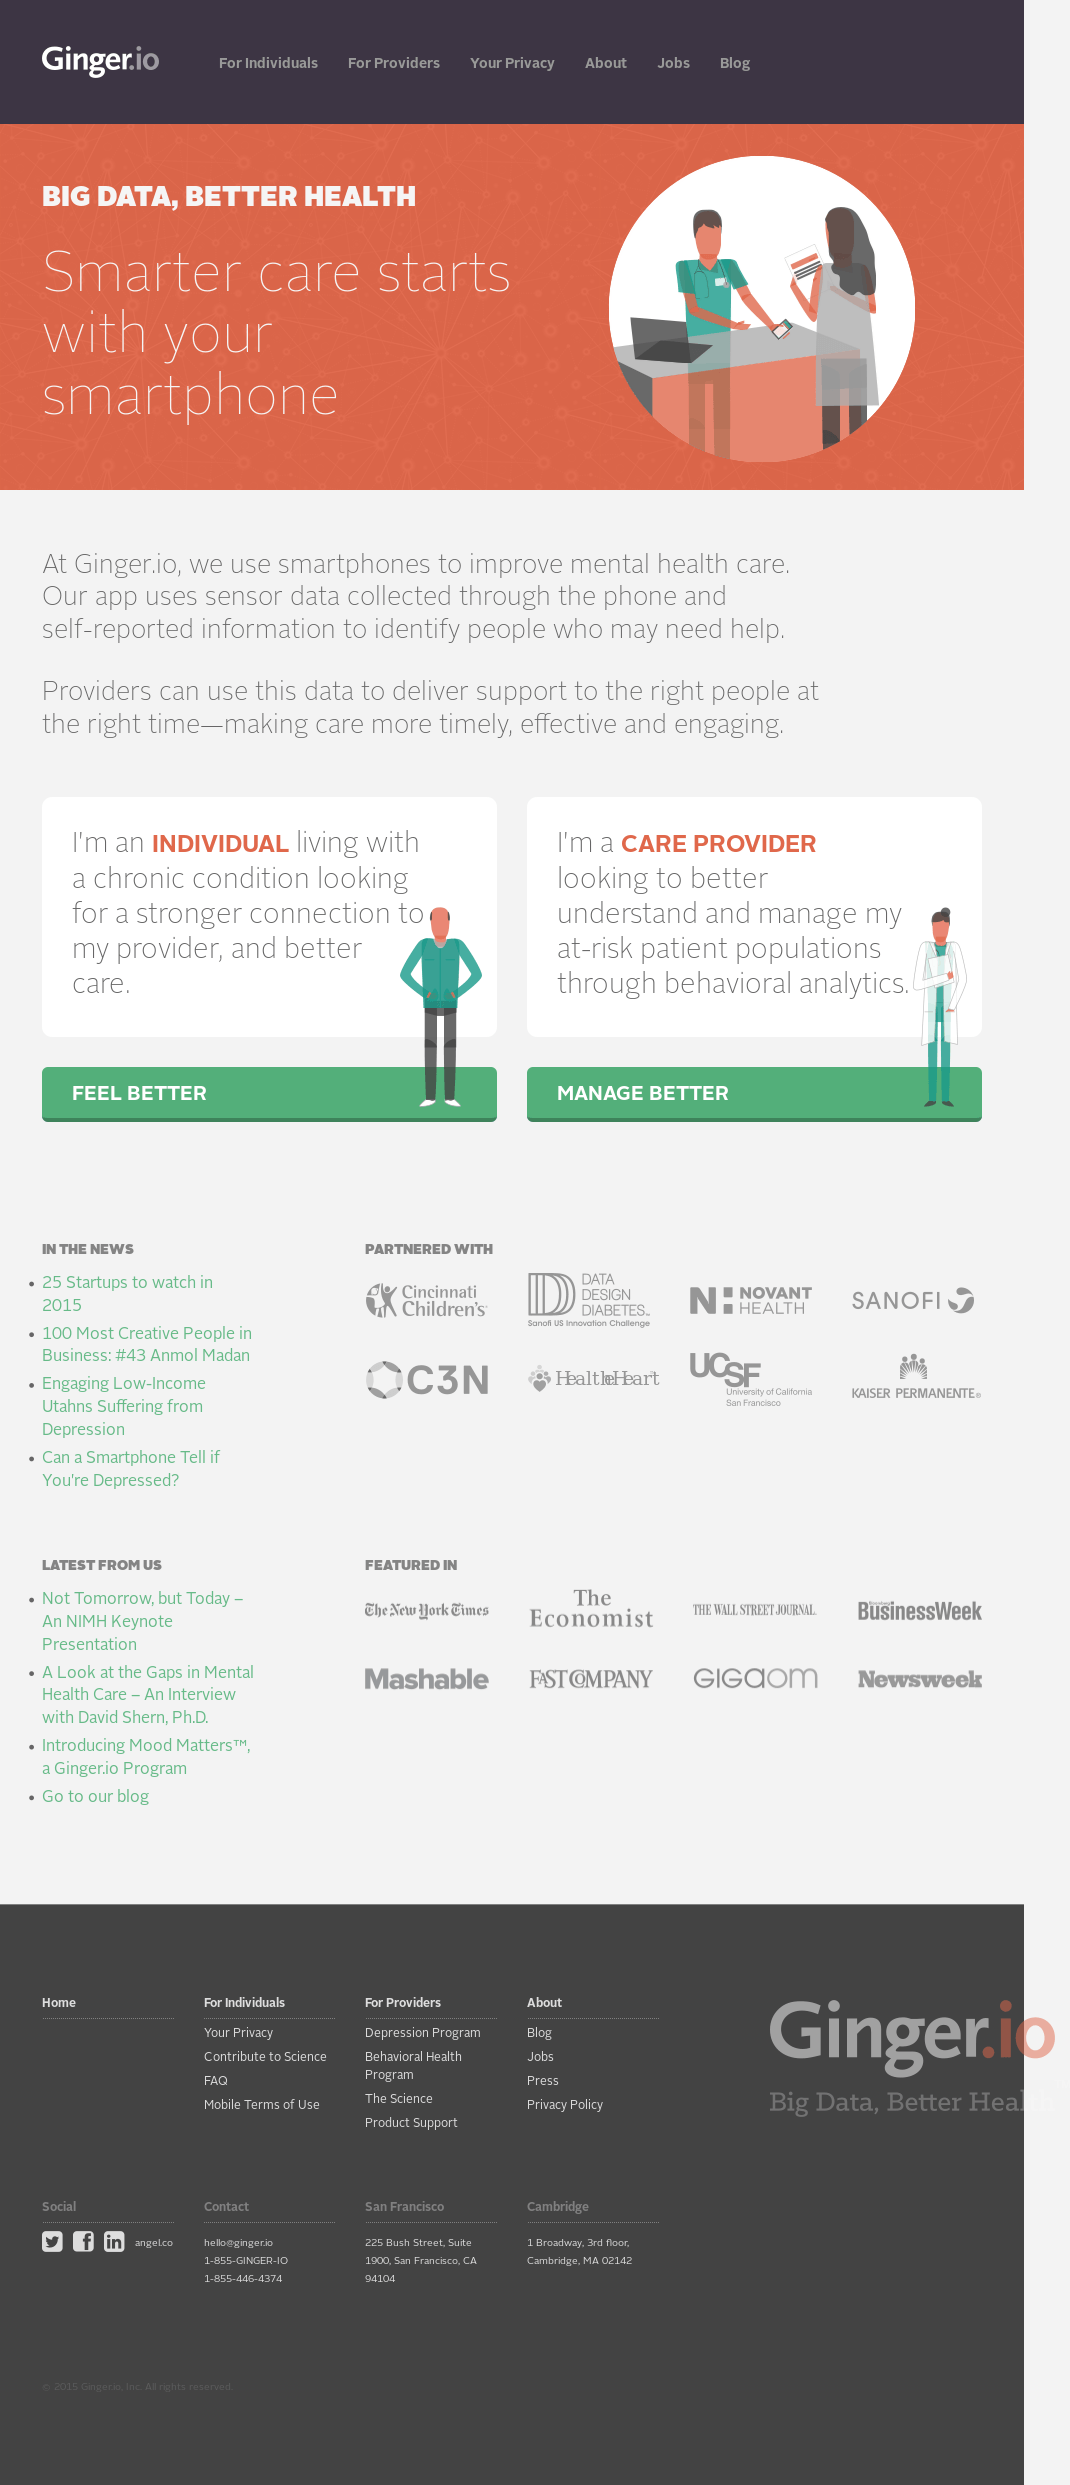 Ginger.io Logo - Ginger.io Competitors, Revenue and Employees Company Profile